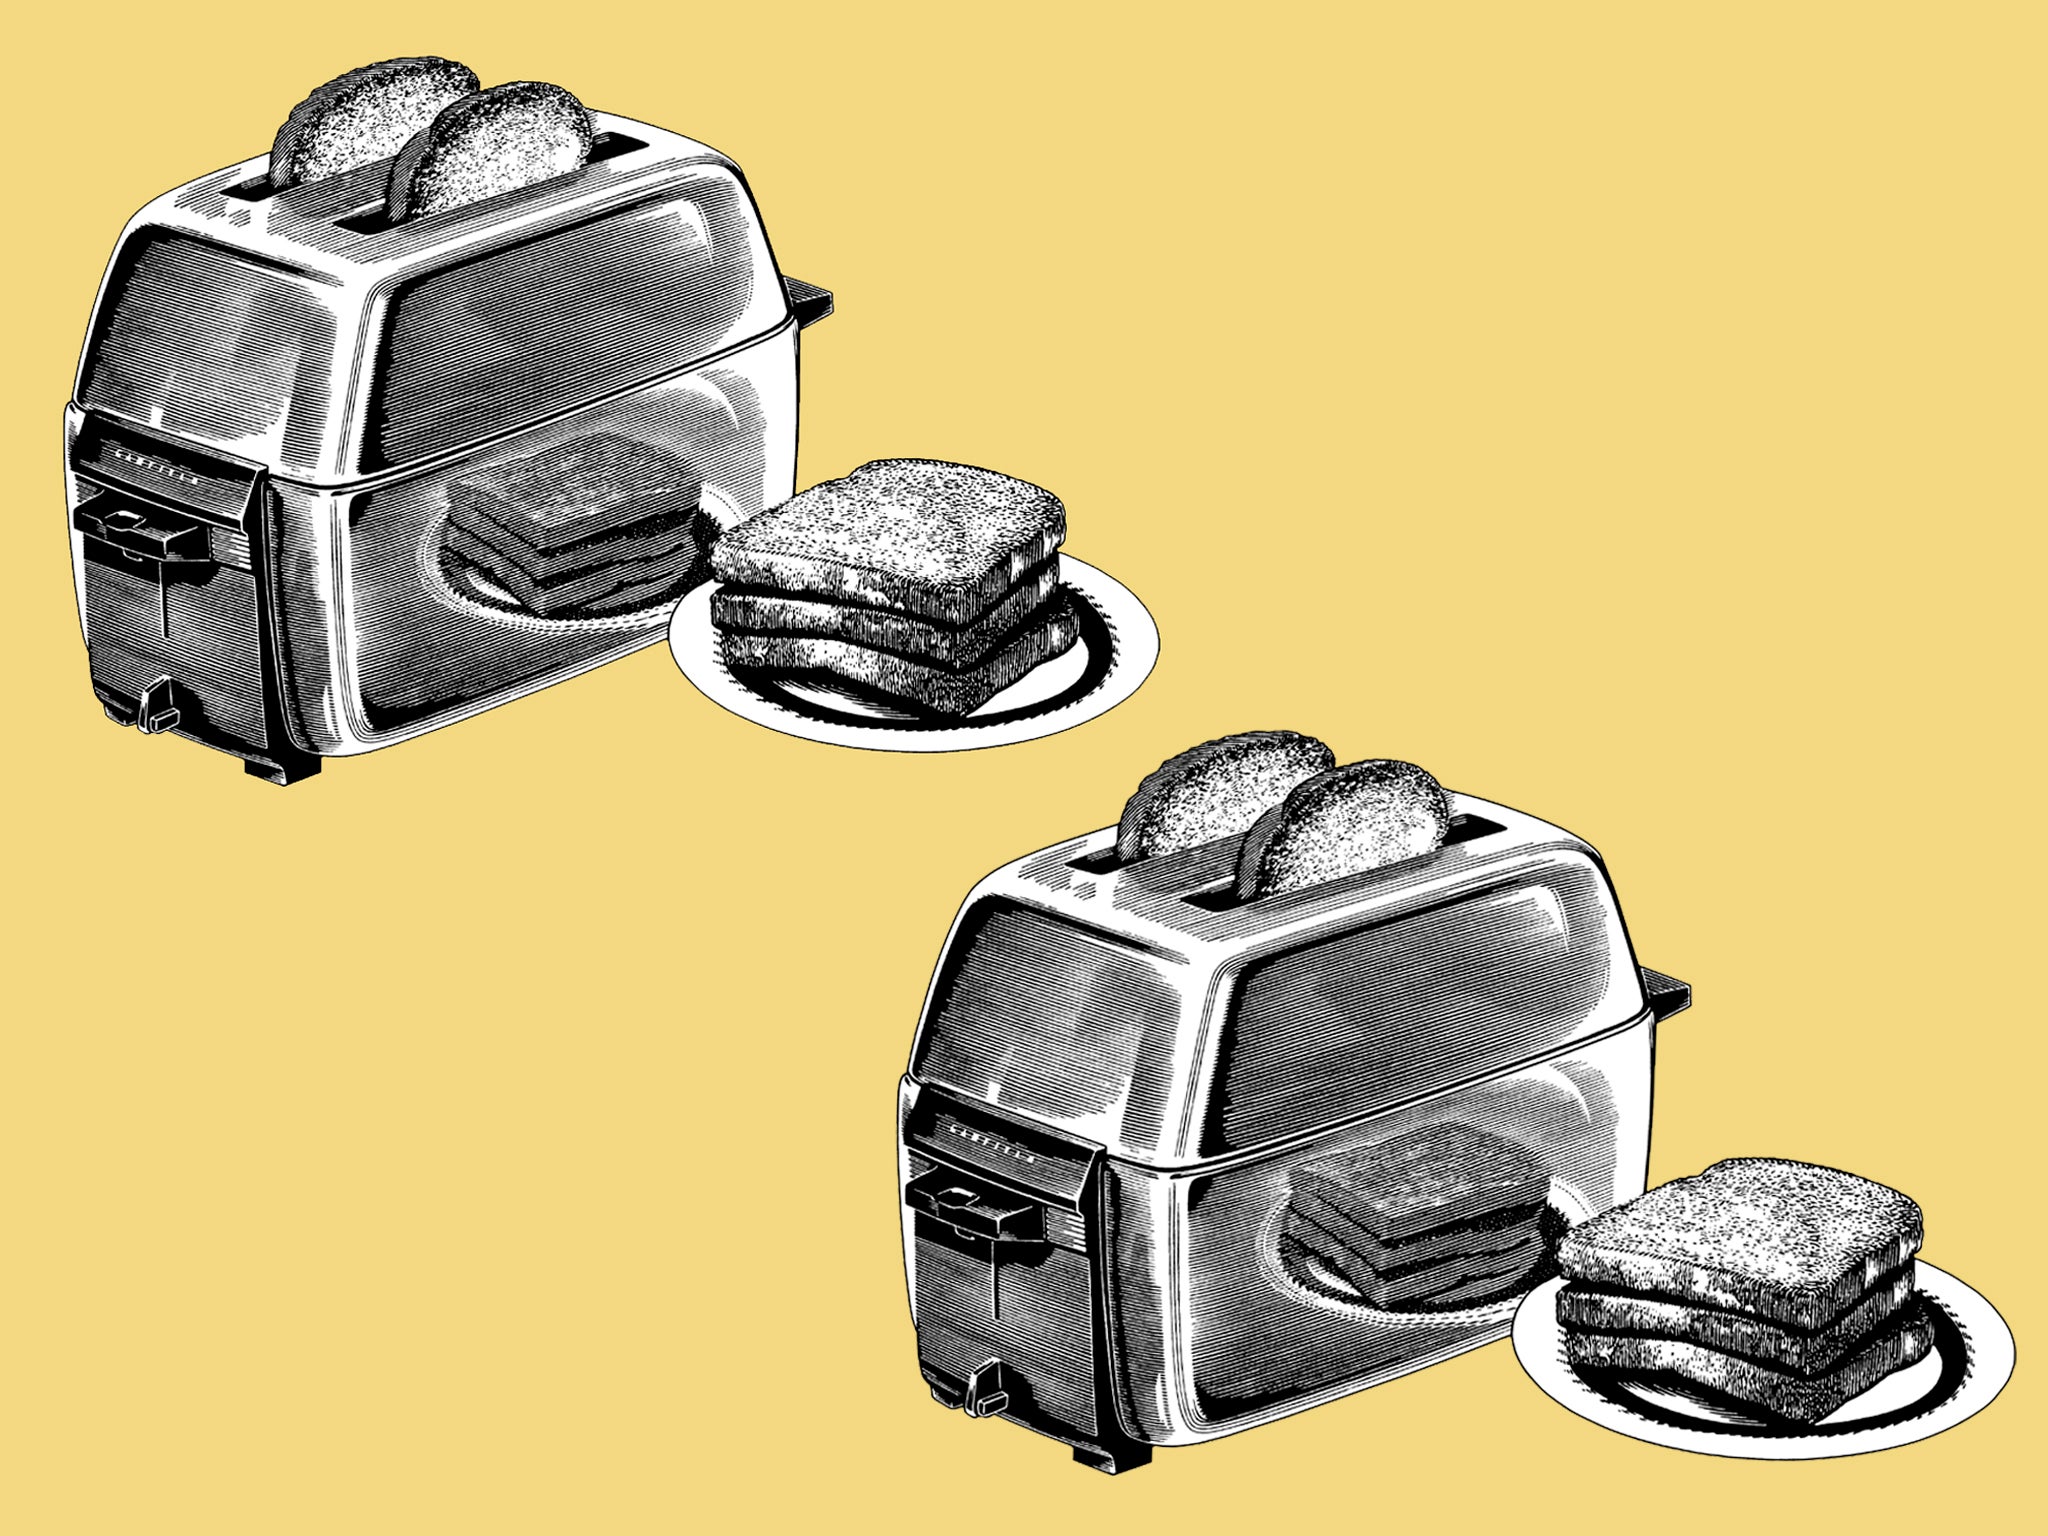 https://static.independent.co.uk/s3fs-public/thumbnails/image/2020/05/19/12/toaster-buying-guide.jpg